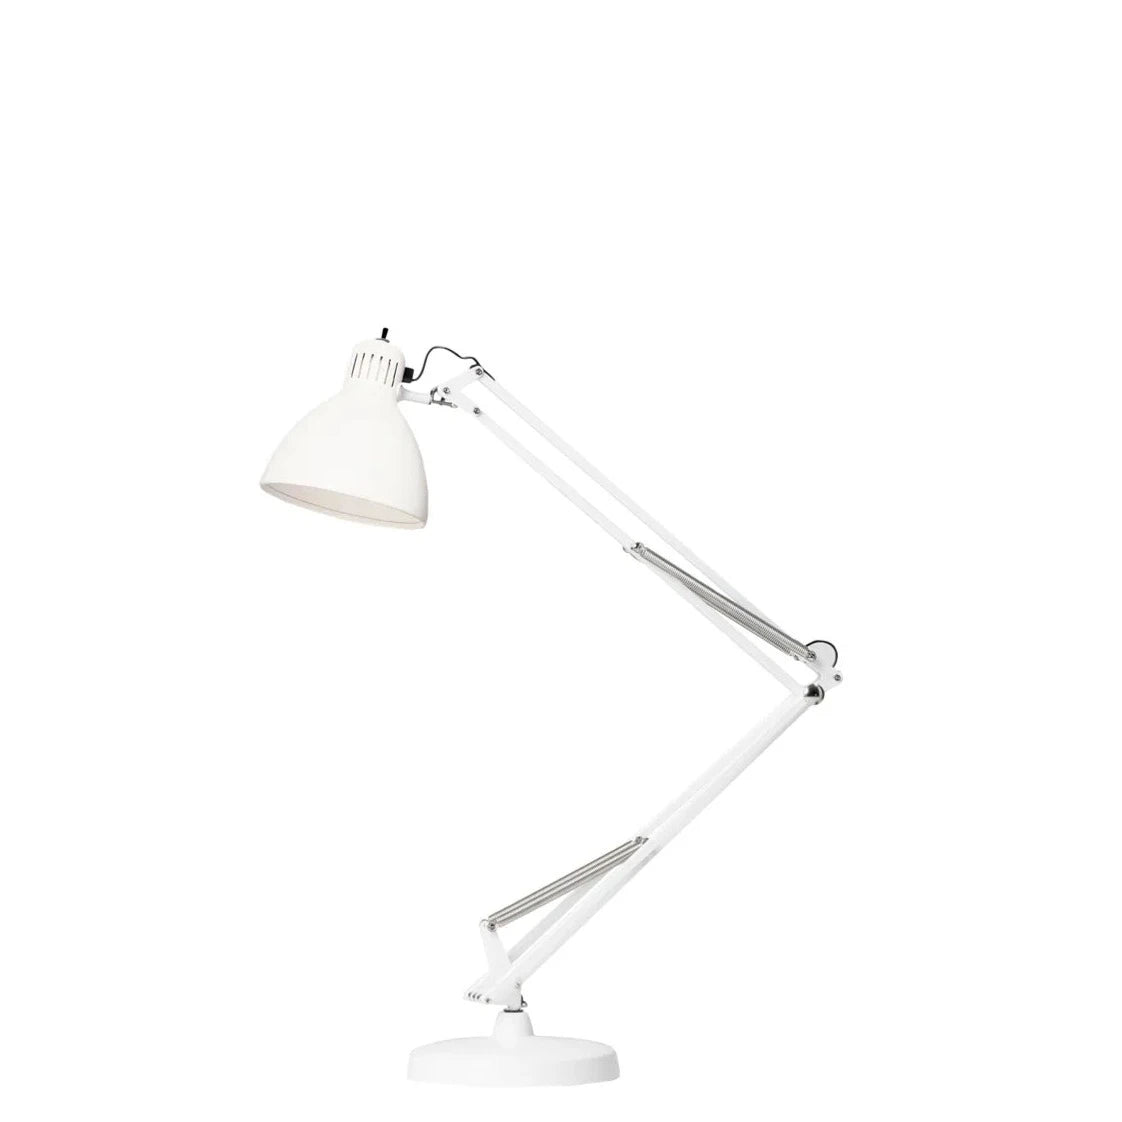 small table lamp, designer metal table lamp, adjustable study table lights online india, Adjustable task Study Small table Lamps online'